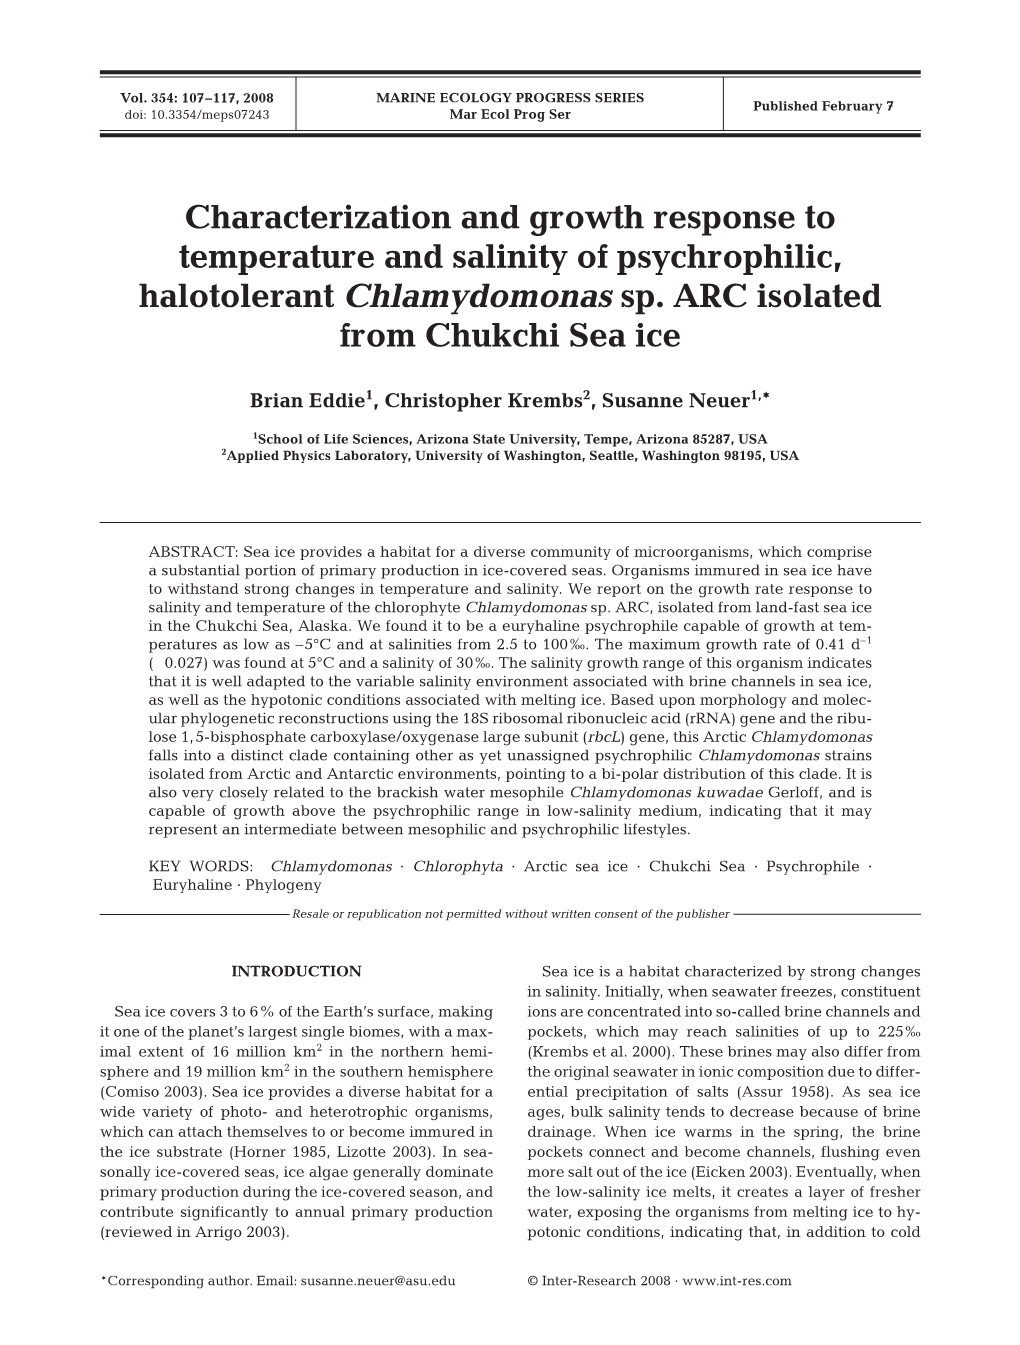 Characterization and Growth Response to Temperature and Salinity of Psychrophilic, Halotolerant Chlamydomonas Sp